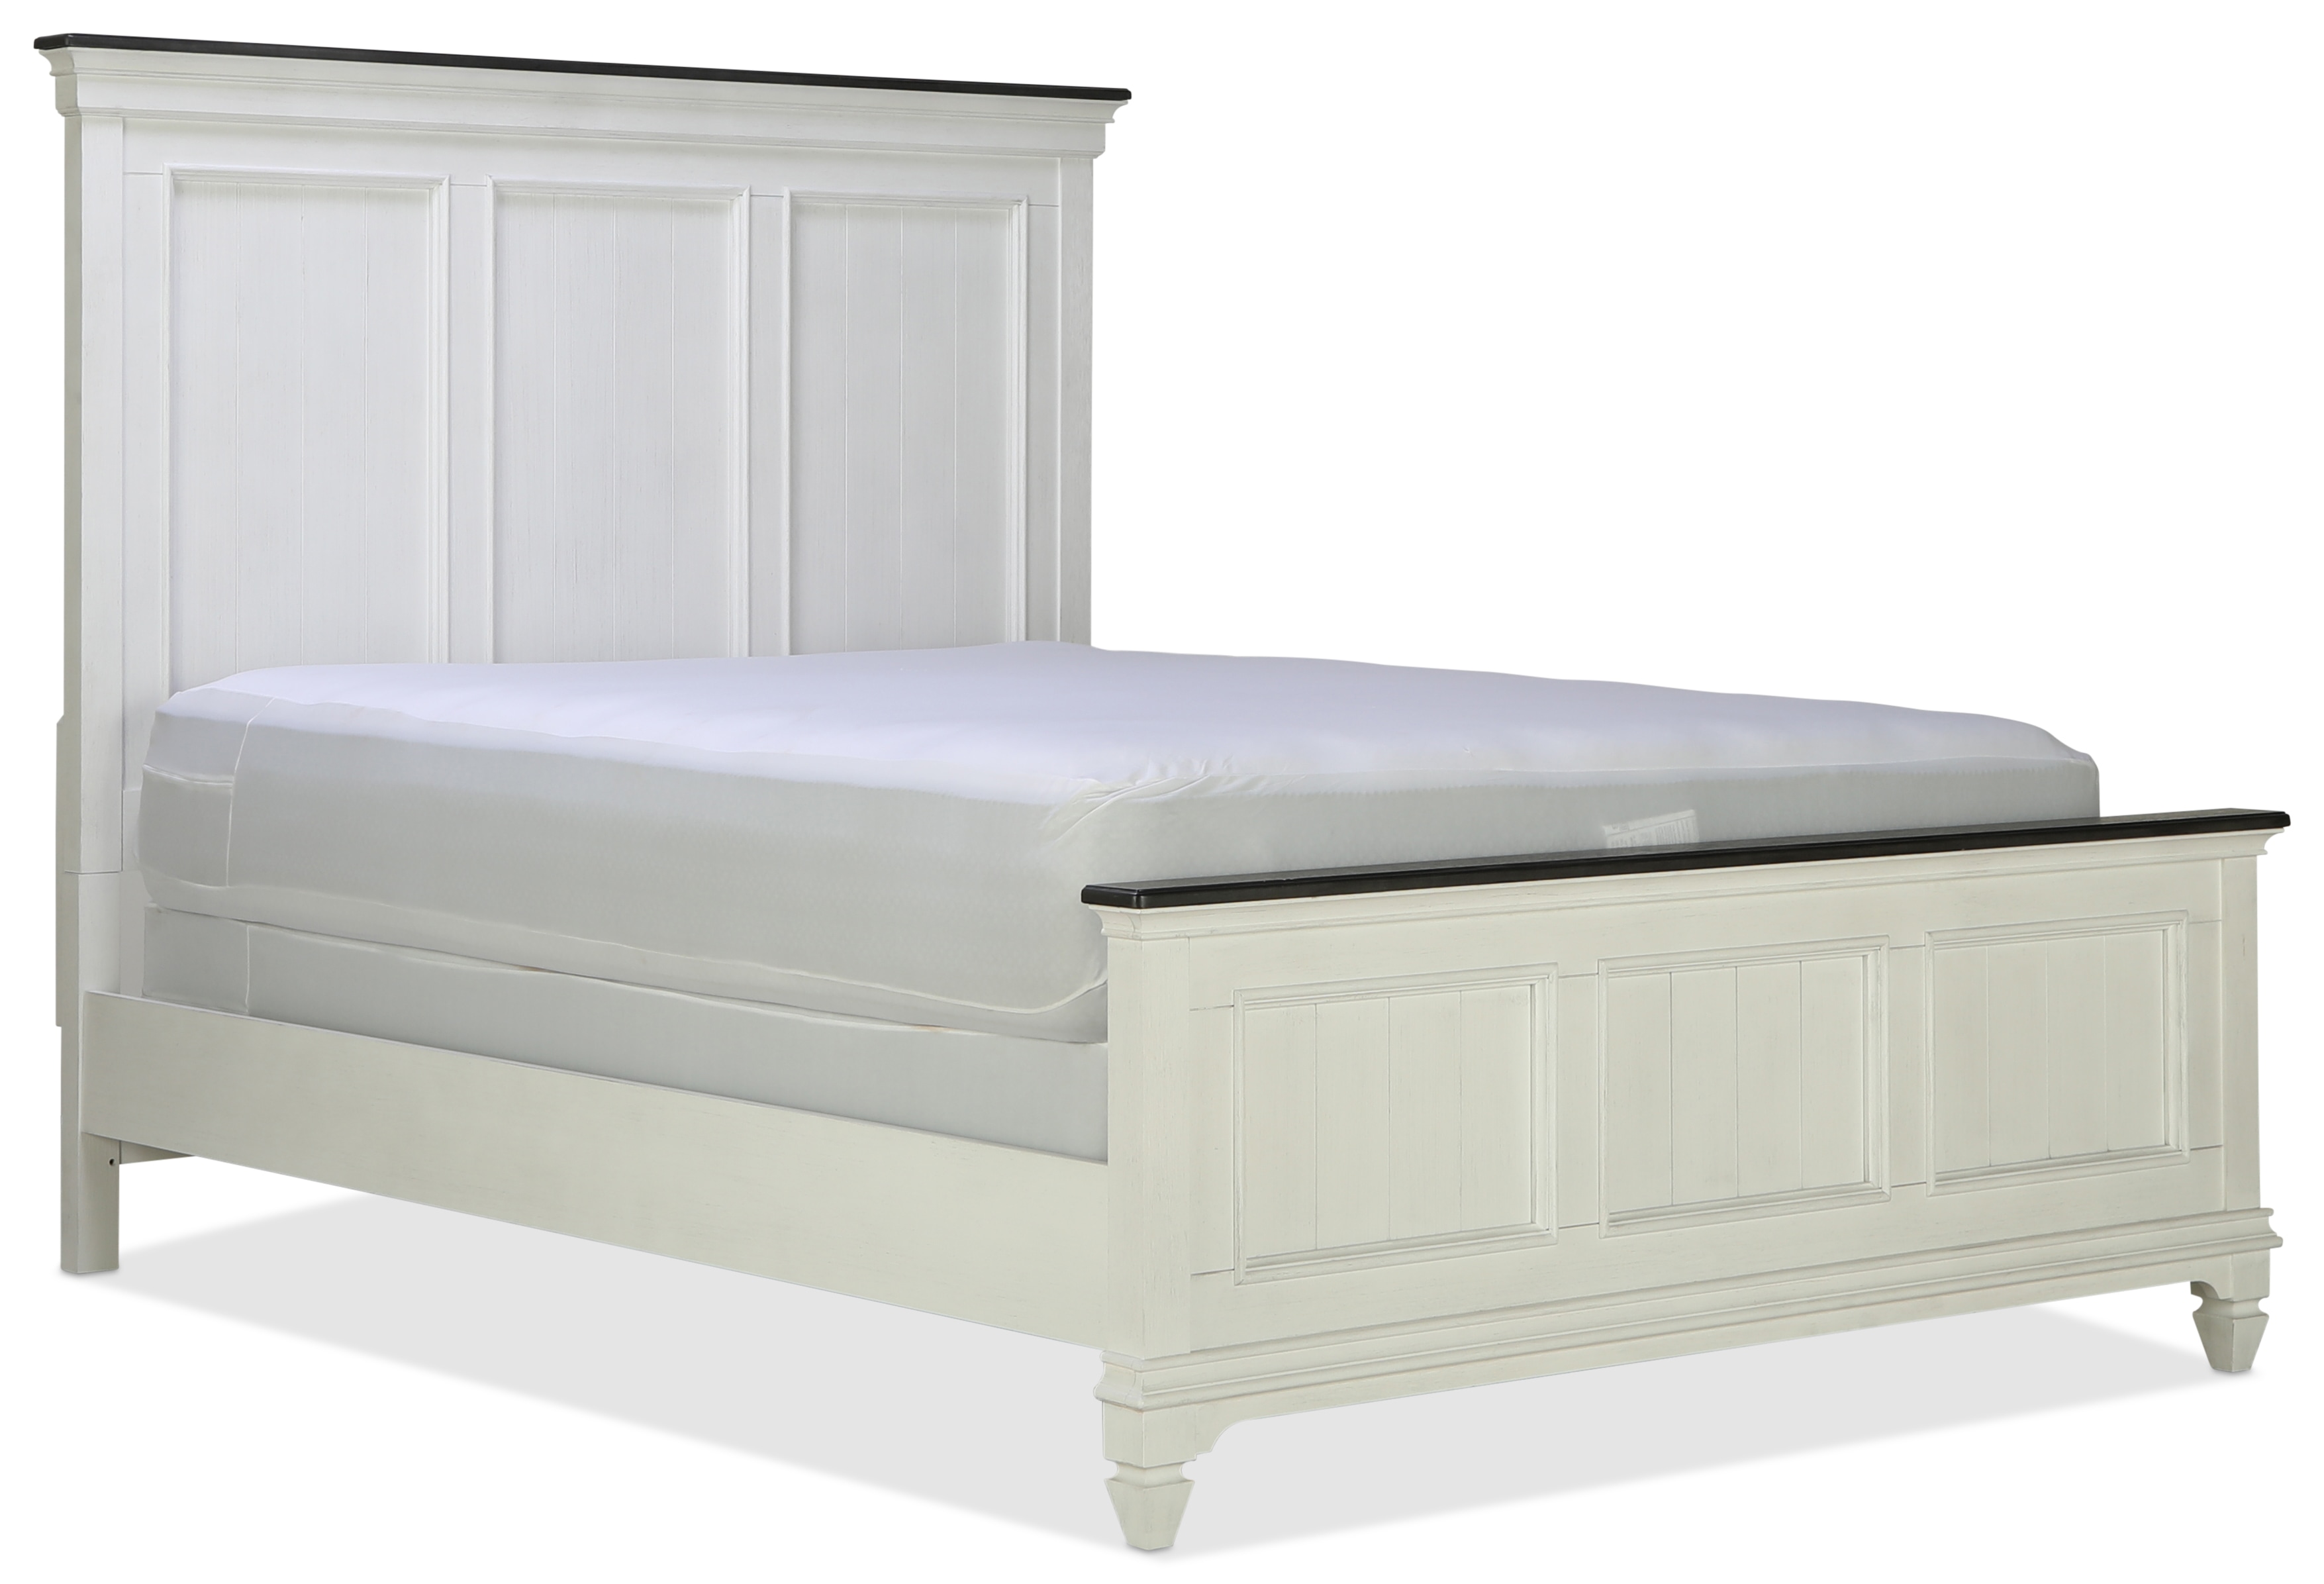 Finley Queen Panel Bed Levin Furniture, Do Full Bed Frames Expand To Queen